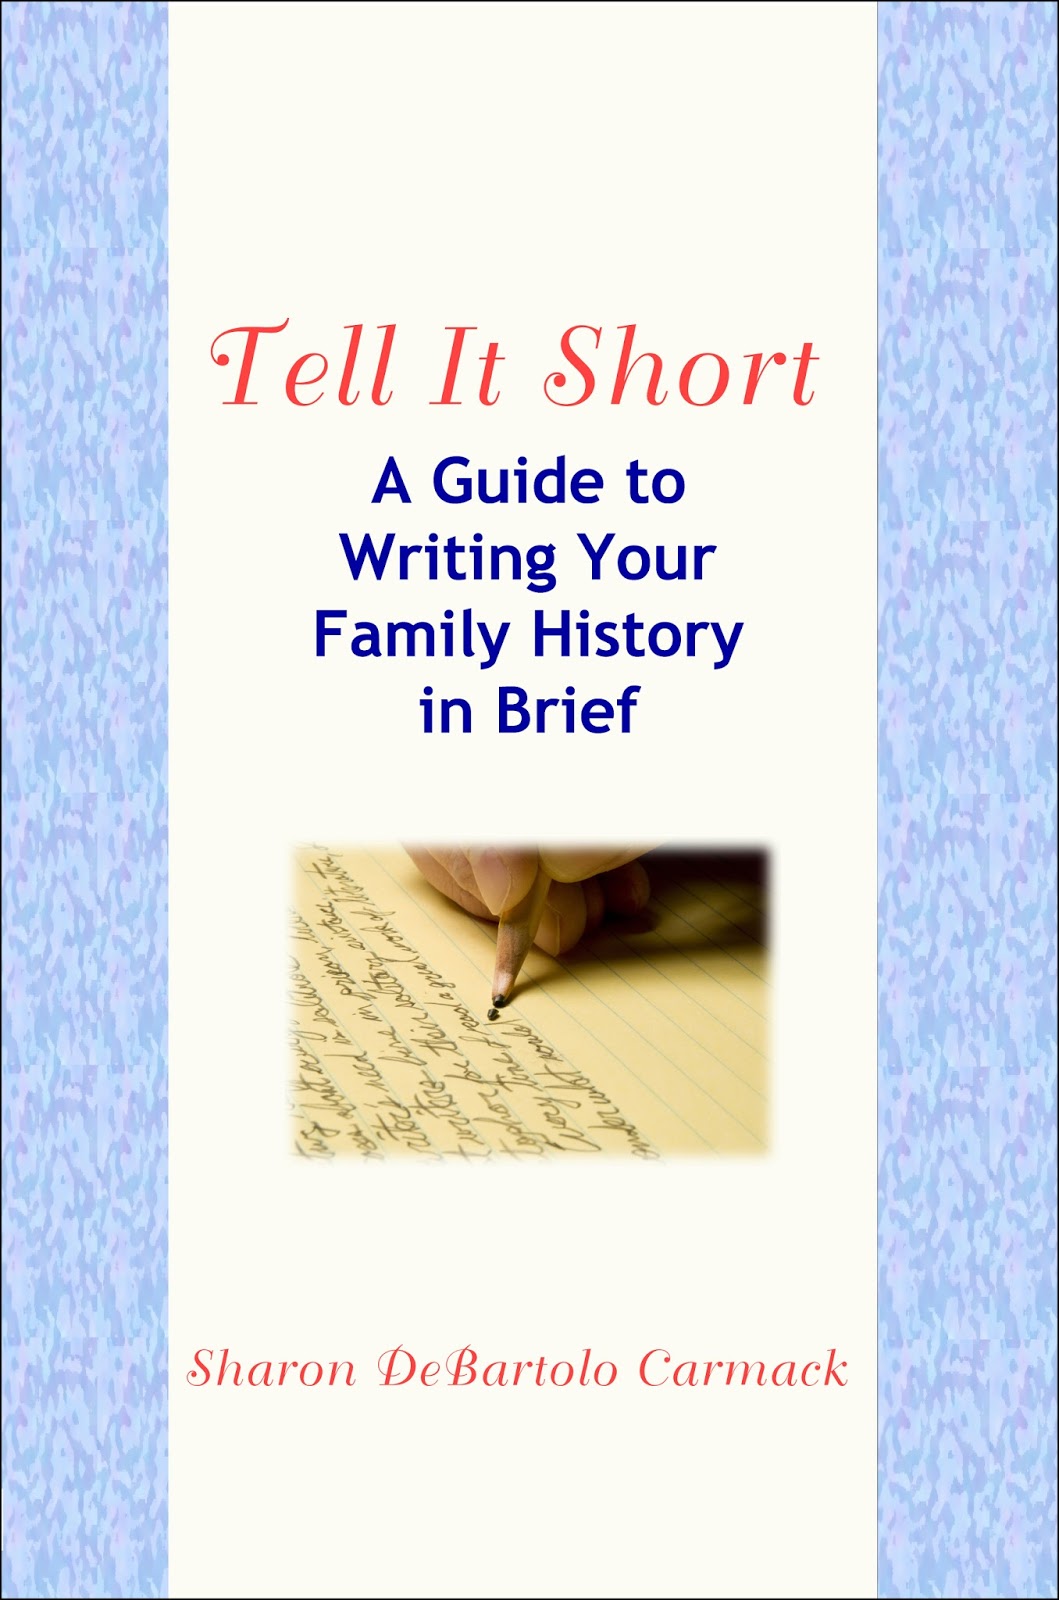 Buy A Narrative Essay Examples About Family History - 29+ History